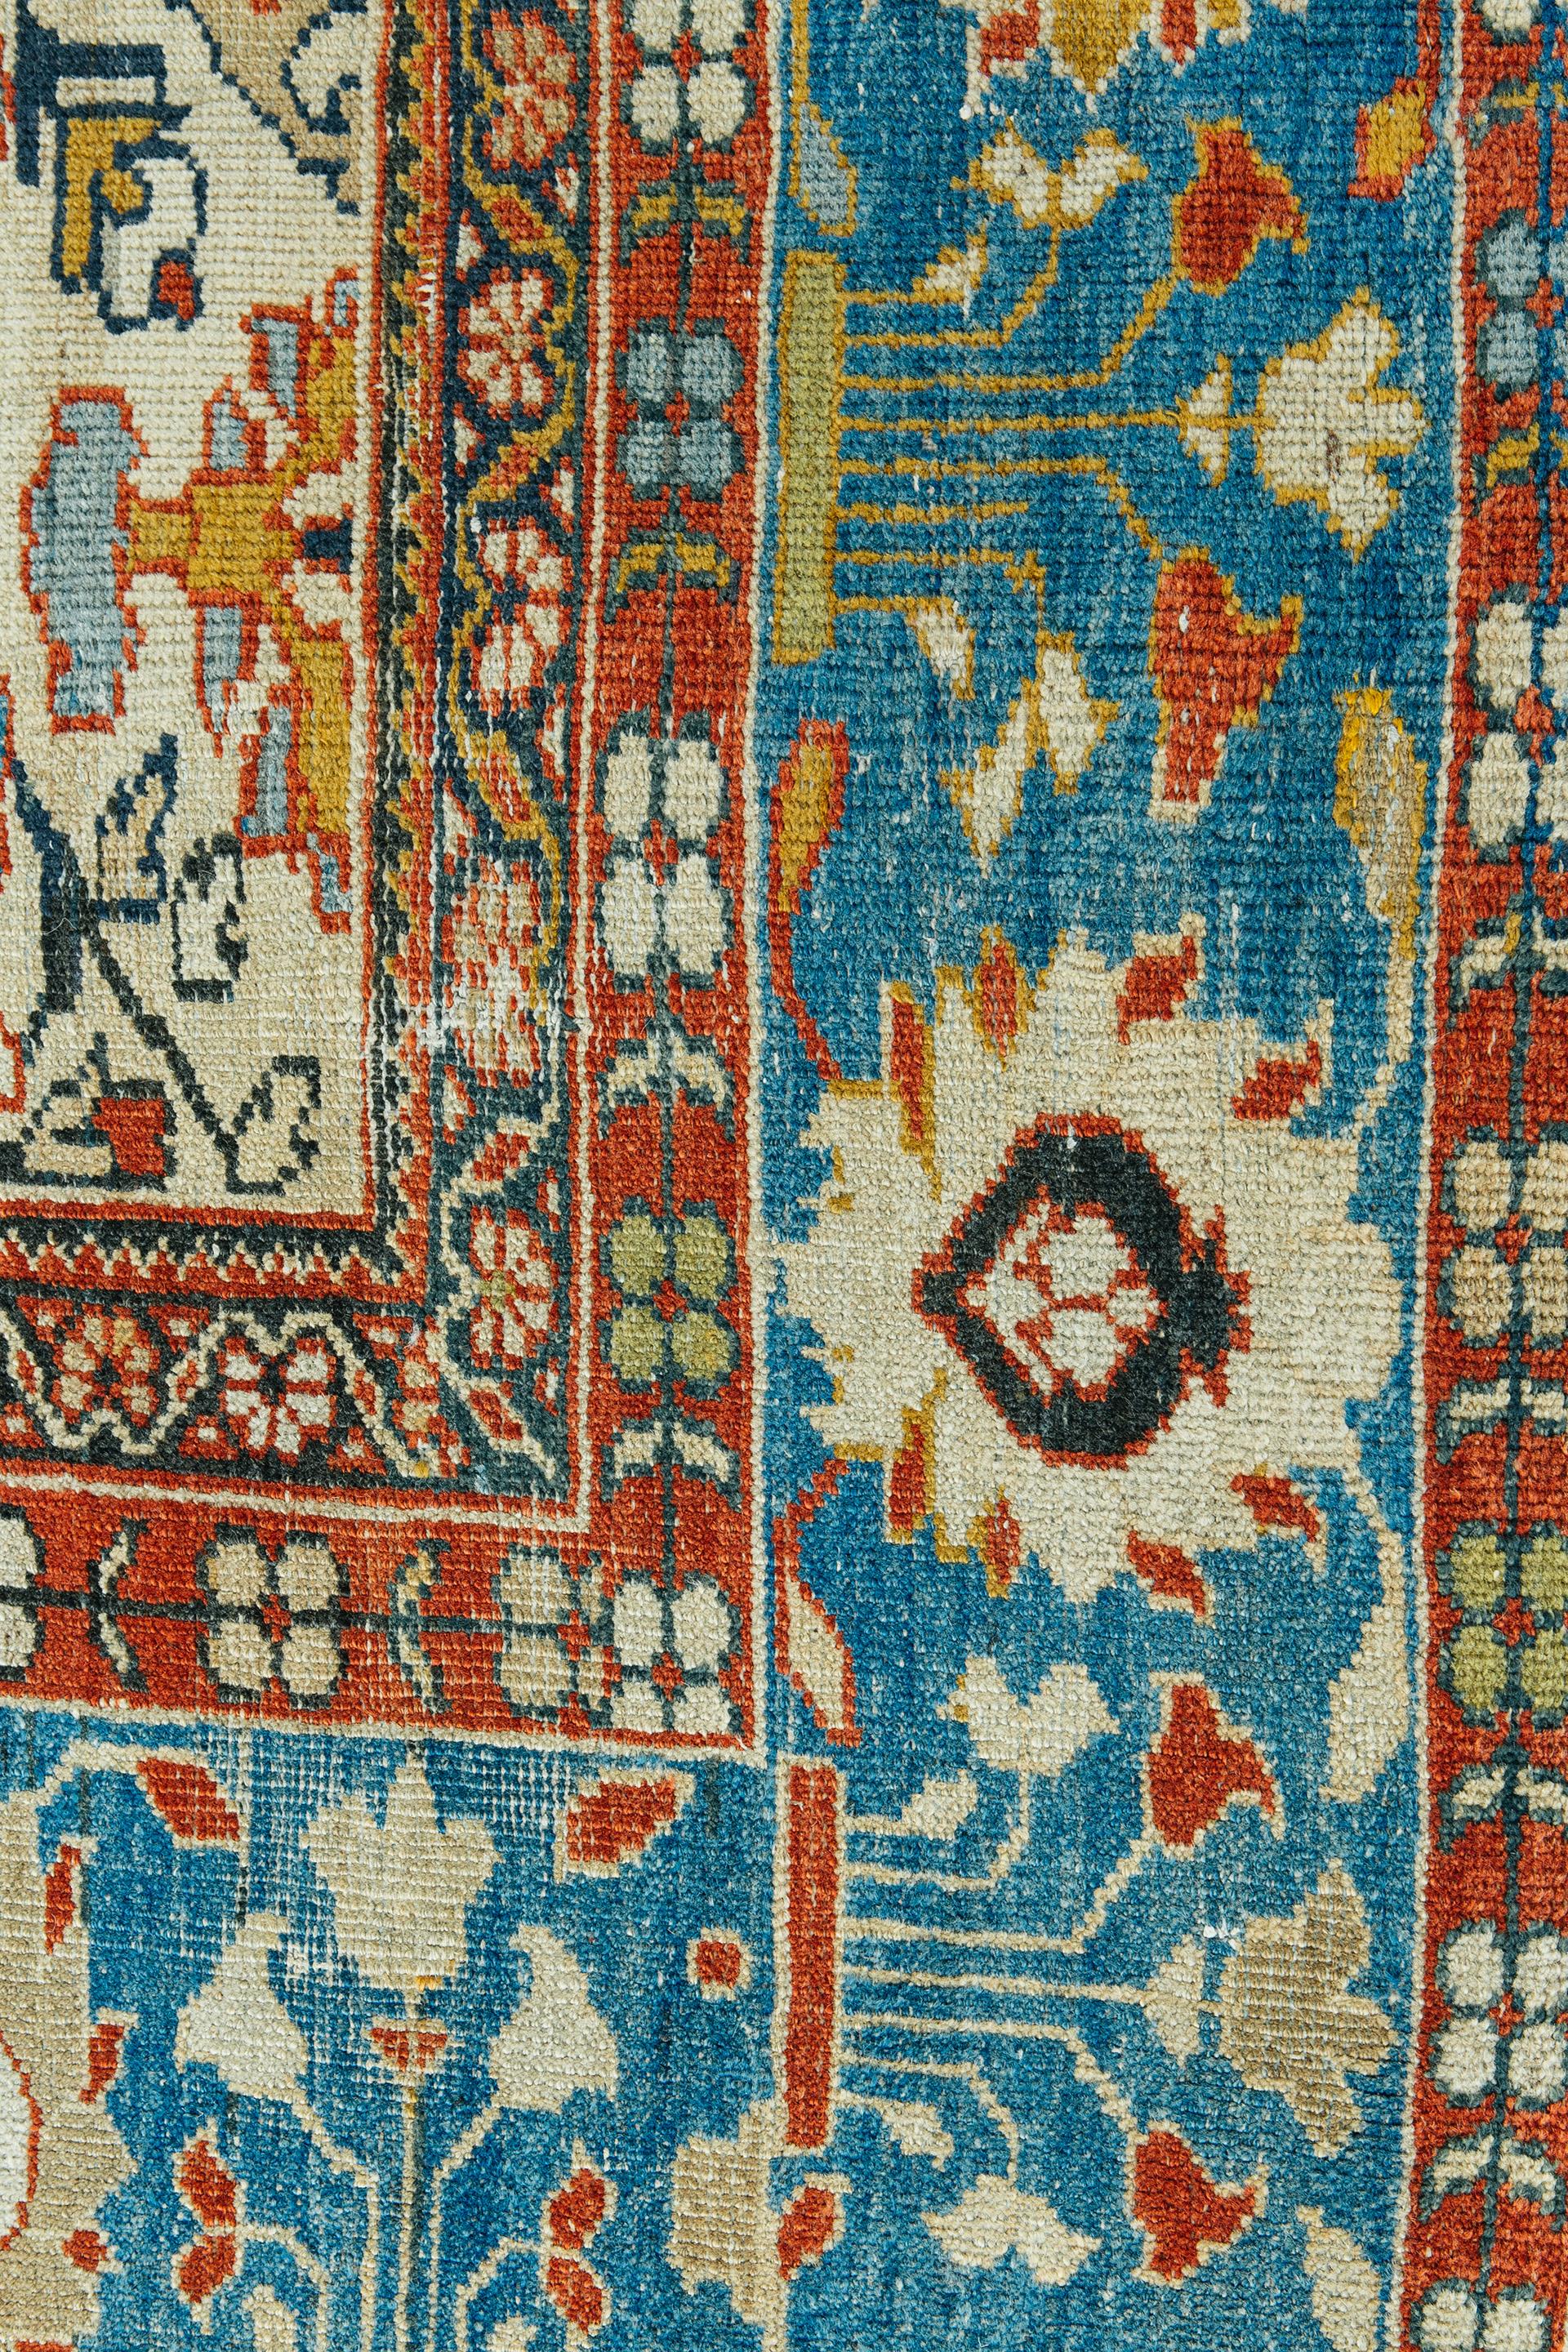 Standout colors make this rug pop out and catch gazes. A gorgeous blue border surrounded by two small red borders accentuates the center of this rug. The entire rug is covered by floral patterns, all as intricately detailed as you can